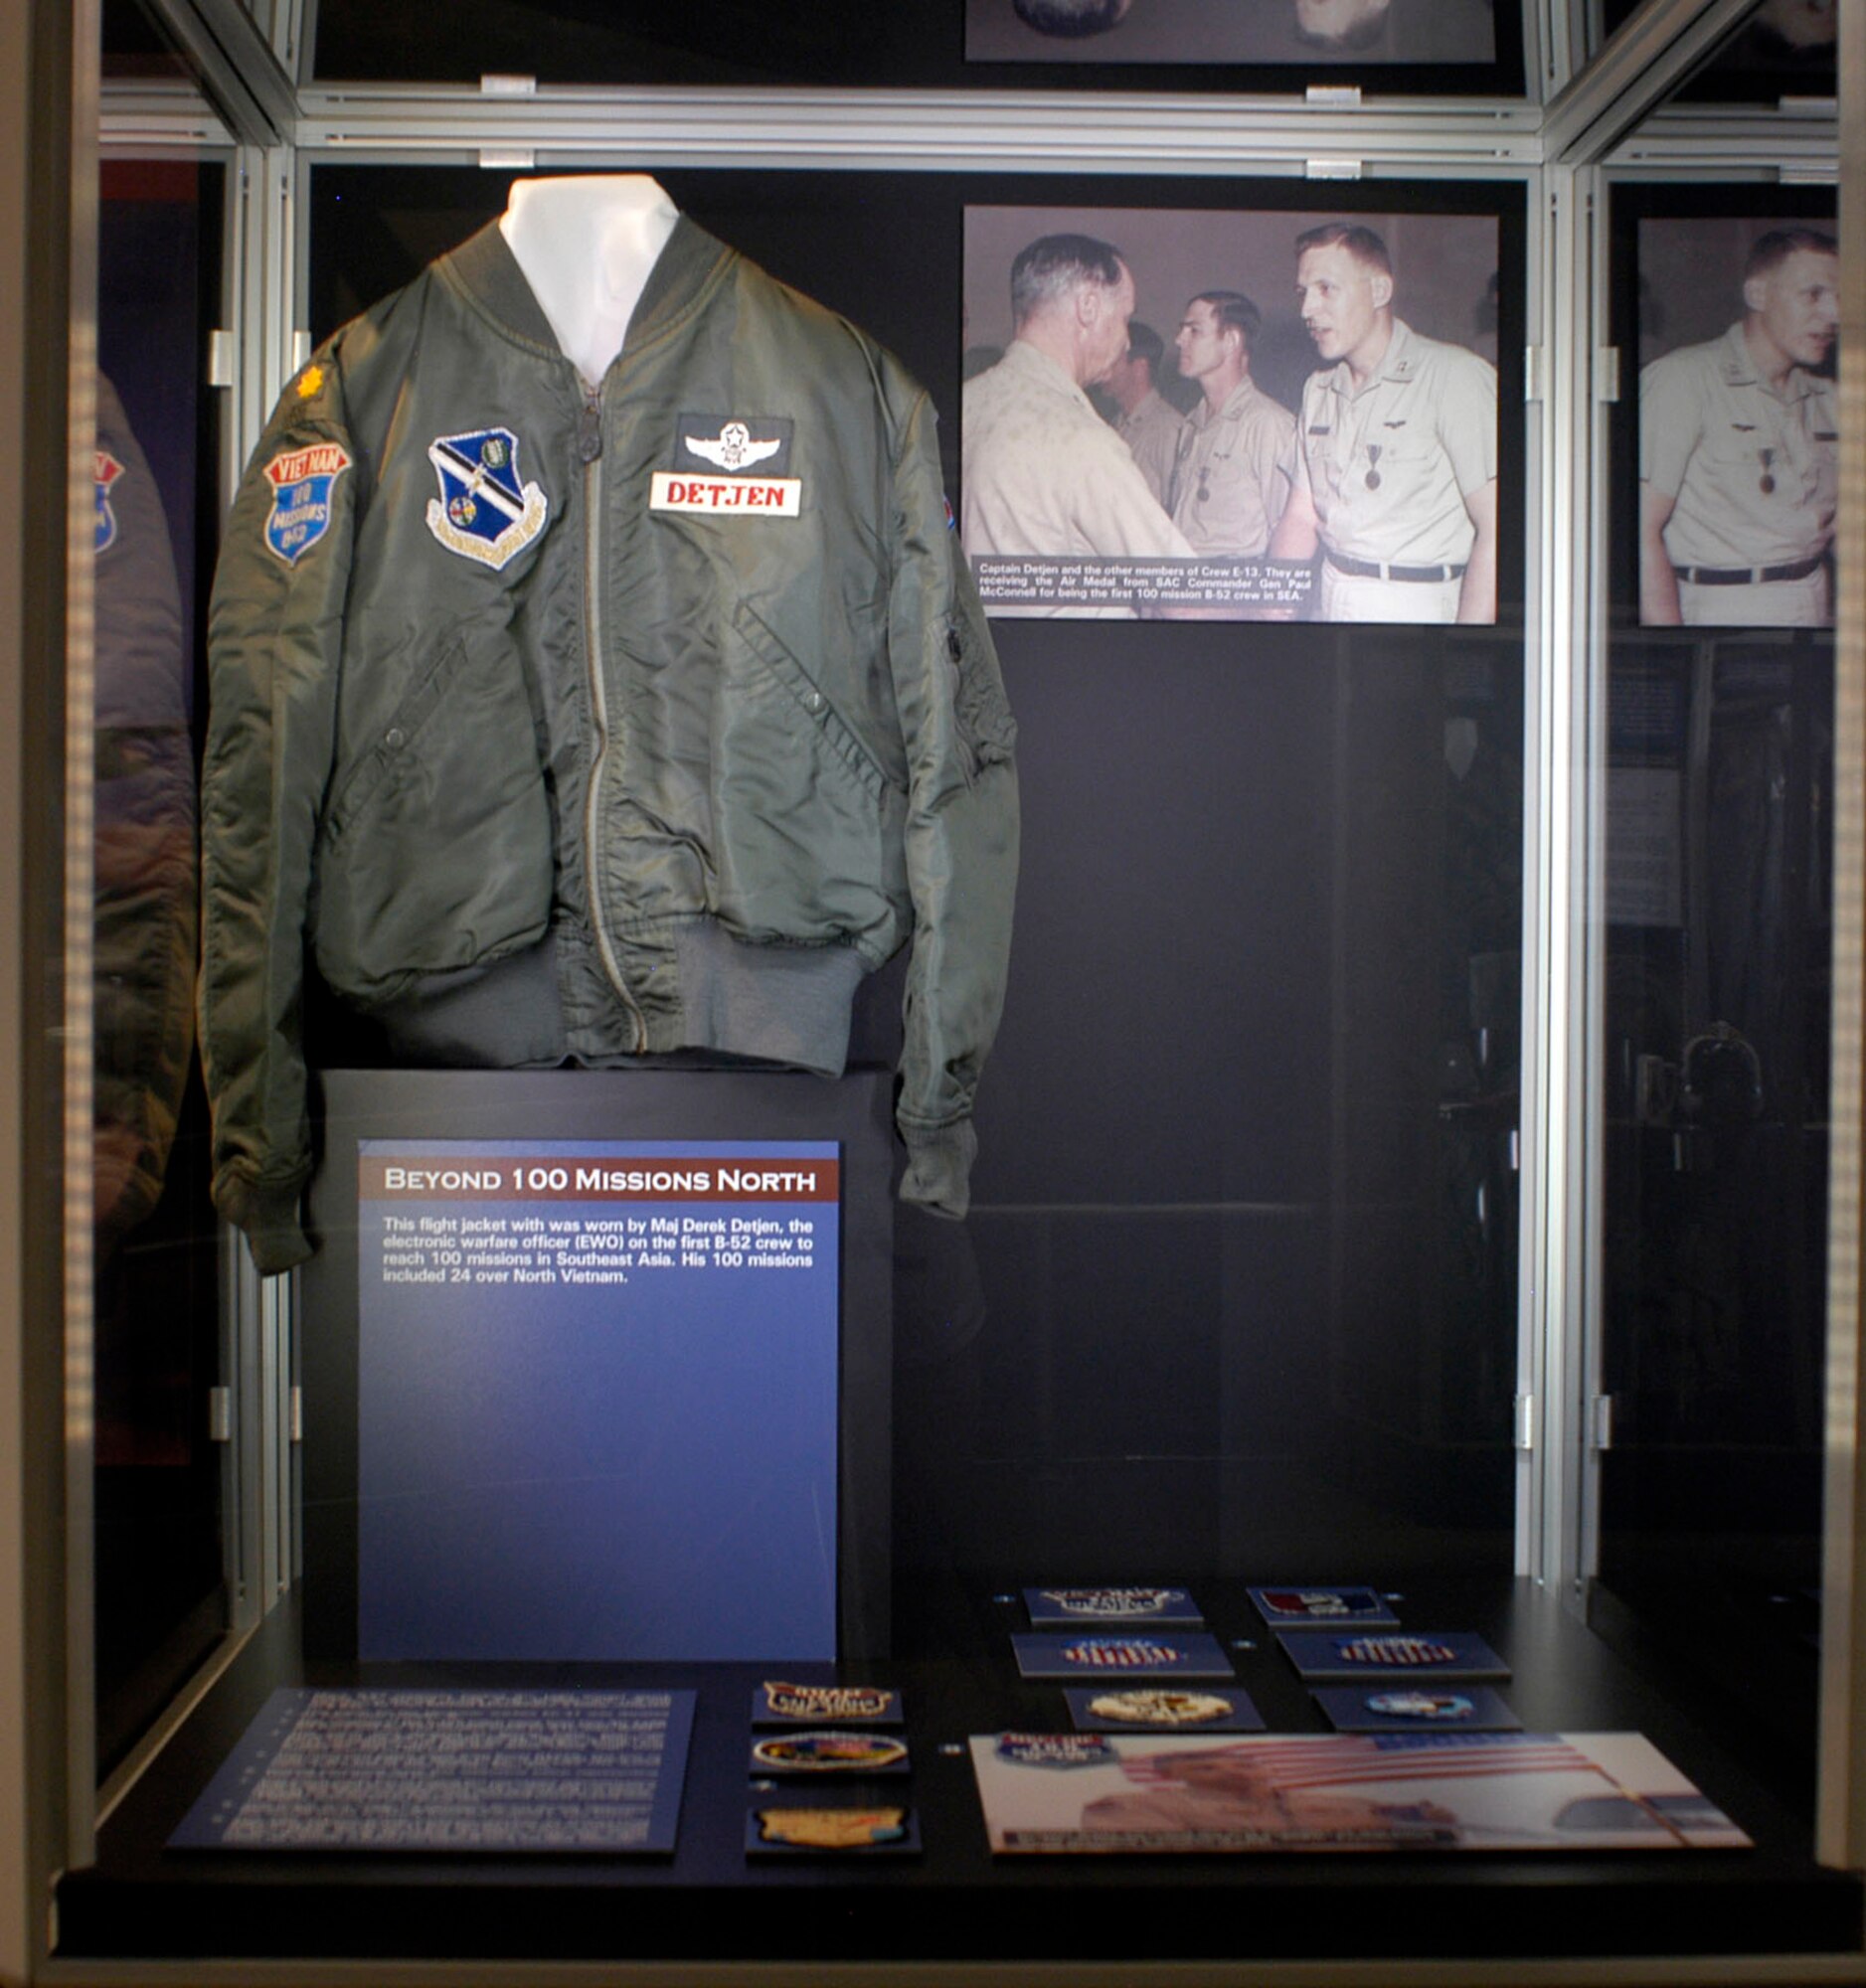 DAYTON, Ohio - On display: Many B-52 crewman tracked Arc Light ground attack strikes by wearing F-105 style patches with “South Vietnam” at the top instead of “North Vietnam.” This one was worn by Capt. Michael McGuinness, a bomb-navigator on B-52s. This flight jacket with was worn by Maj. Derek Detjen, the electronic warfare officer (EWO) on the first B-52 crew to reach 100 missions in Southeast Asia. His 100 missions included 24 over North Vietnam.This patch for the electronic warfare EC-47 was donated by Capt. John Franklin, III. This variation of the F-105 patch came from two AC-119K flight engineers. The 100 mission patch was worn by Master Sgt. Art Perry and the 120-mission patch by Airman 1st Class John Wolff. This patch was donated by Steven Fritts, who was assigned to the 43rd Security Police Squadron, Eighth Air Force Headquarters, at Andersen Air Base, Guam, during Linebacker operations. The CBF is for Central Base Funds, and it appears that Fritts probably drove many high level officers around on the base.This humorous patch came from Korat RTAFB. The bus to town cost two baht (or about 10 cents U.S.) and drove on a road at the end of the runway. So, 100 take-offs would equal 100 missions over the two baht bus. Ground personnel wore this whimsical patch representing 100 trips on the local bus. This patch made fun of boring but necessary administrative duties assigned to some aircrew. The “duty pig” worked a shift at the squadron operations desk answering the phone, posting the flight schedule, and checking aircraft available. “Mobile” was sitting in the mobile control tower taking note of flights coming in and going out. This patch was made for missions flown during OPERATION DESERT STORM in 1991. Although the colors are different, the overall shape is clearly from the original F-105 patch. The 100 mission patch tradition reaches to OPERATION ENDURING FREEDOM (OEF) and OPERATION IRAQI FREEDOM (OIF). In 2005, the donor, Lt. Col. Tim Sipes, then-commander 